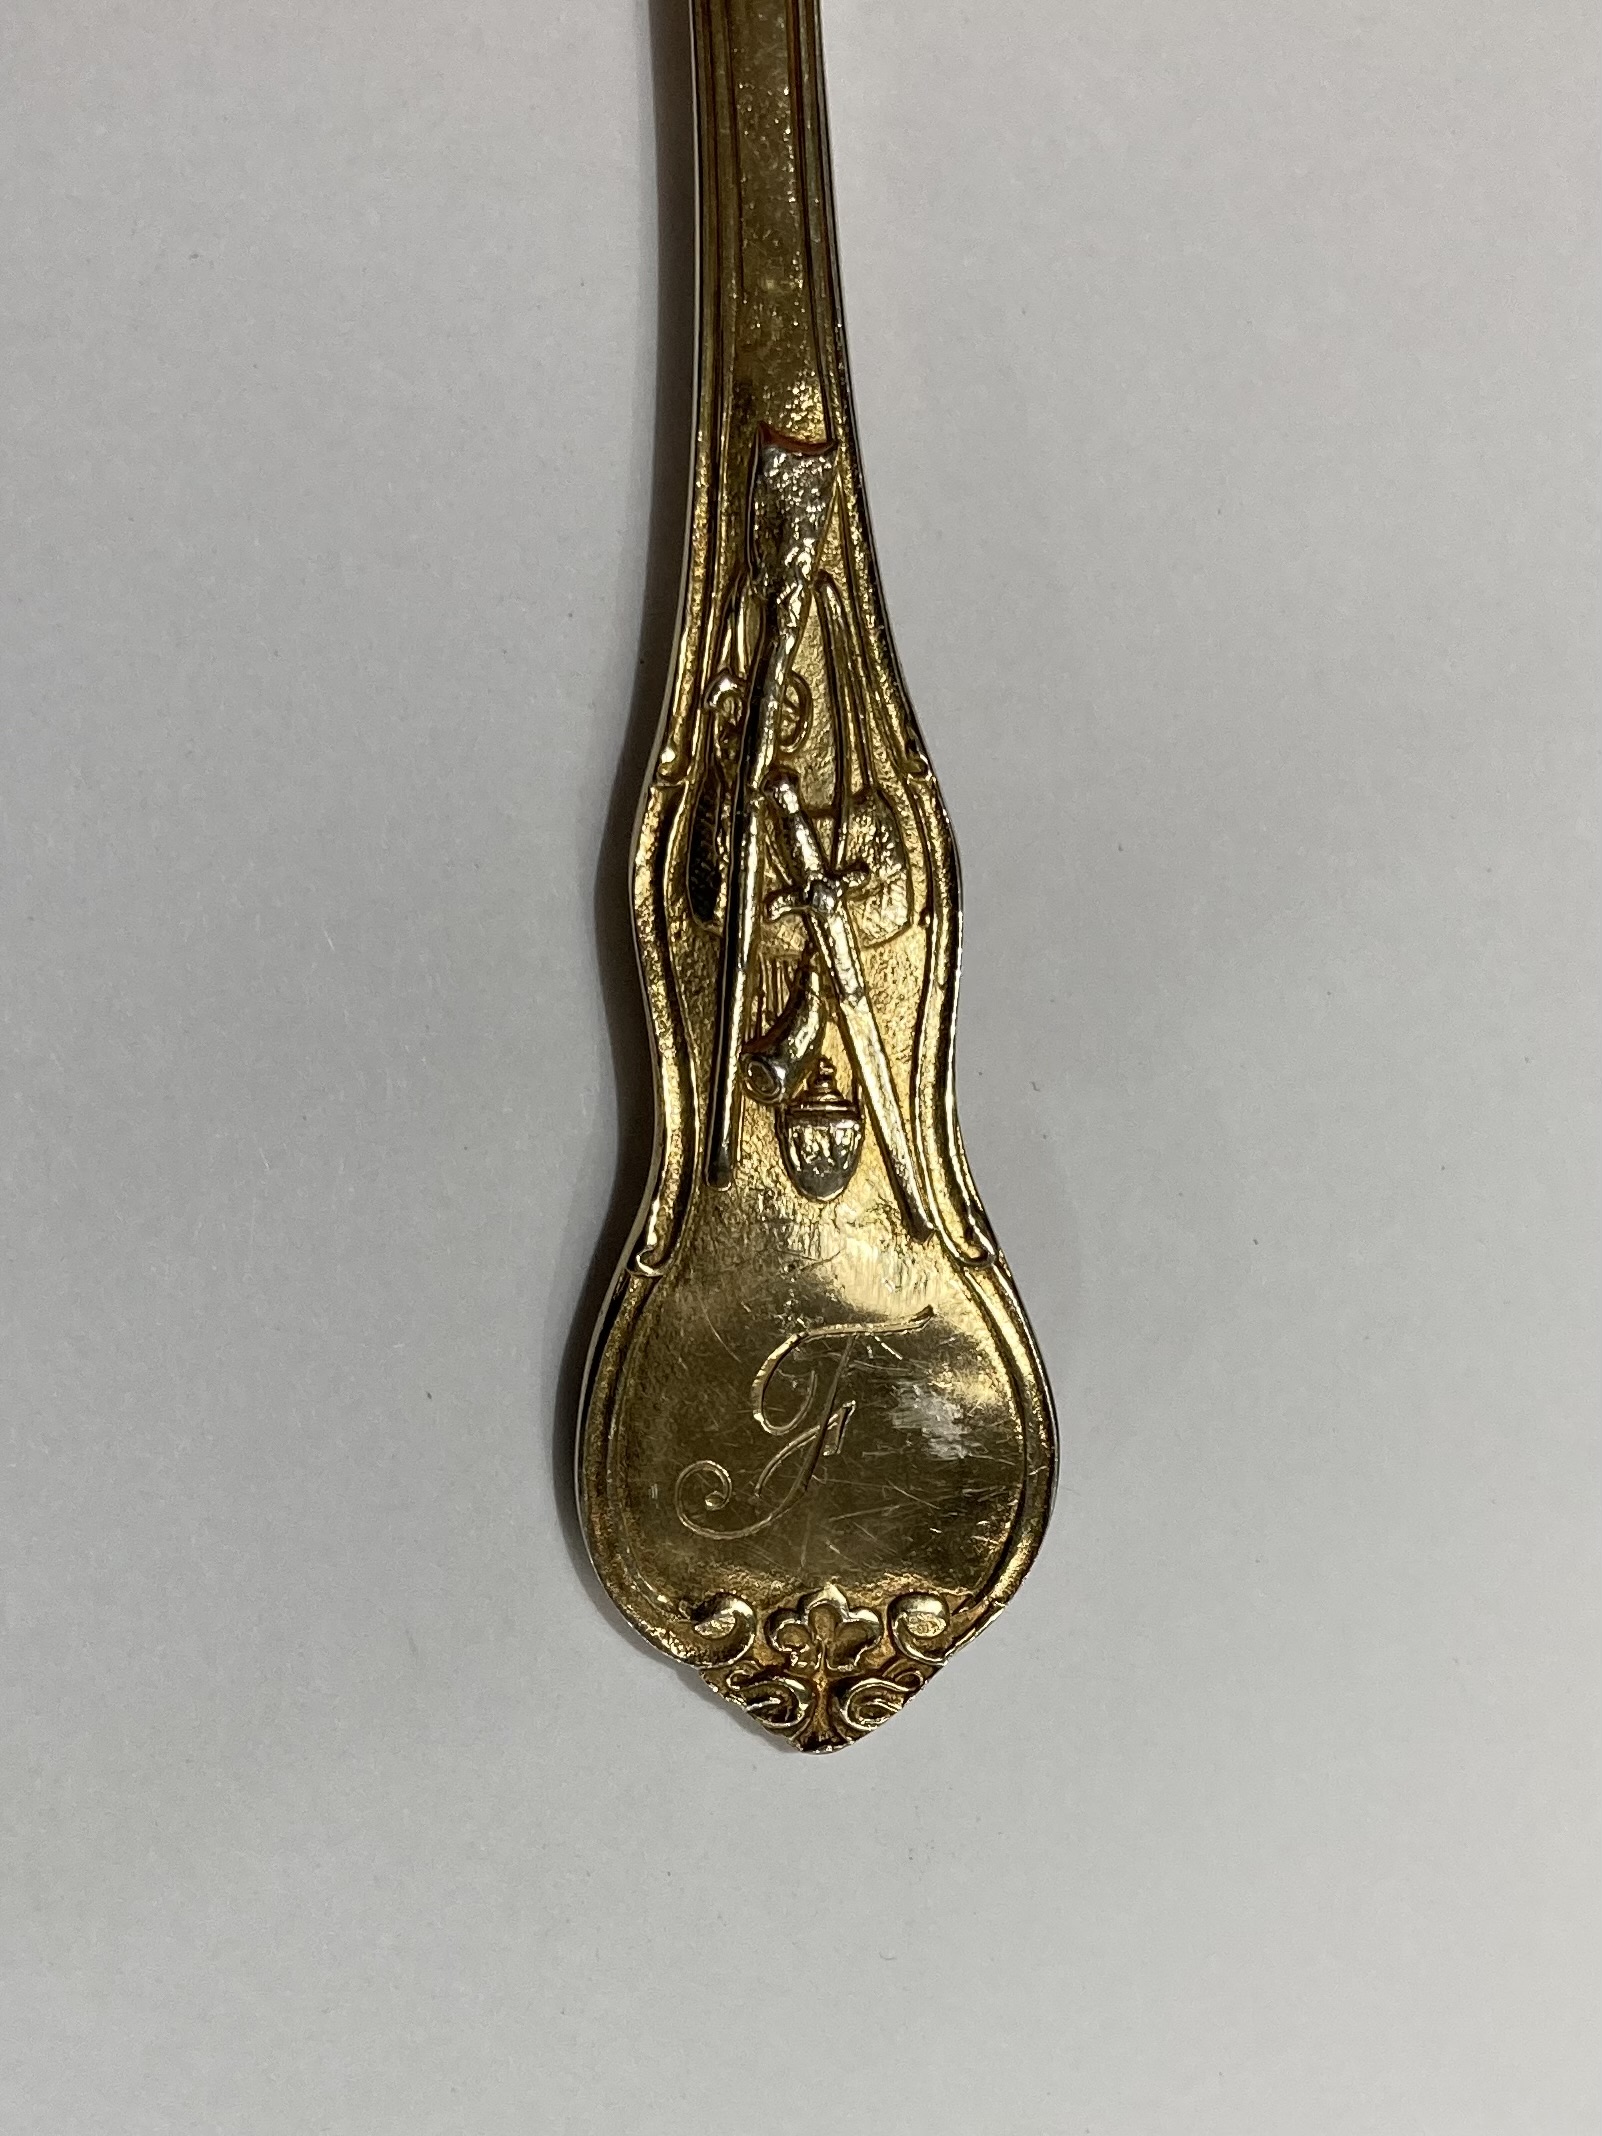 A FRENCH RARE SILVER-GILT SAUCE LADLE, EARLY 19TH CENTURY - Image 3 of 5